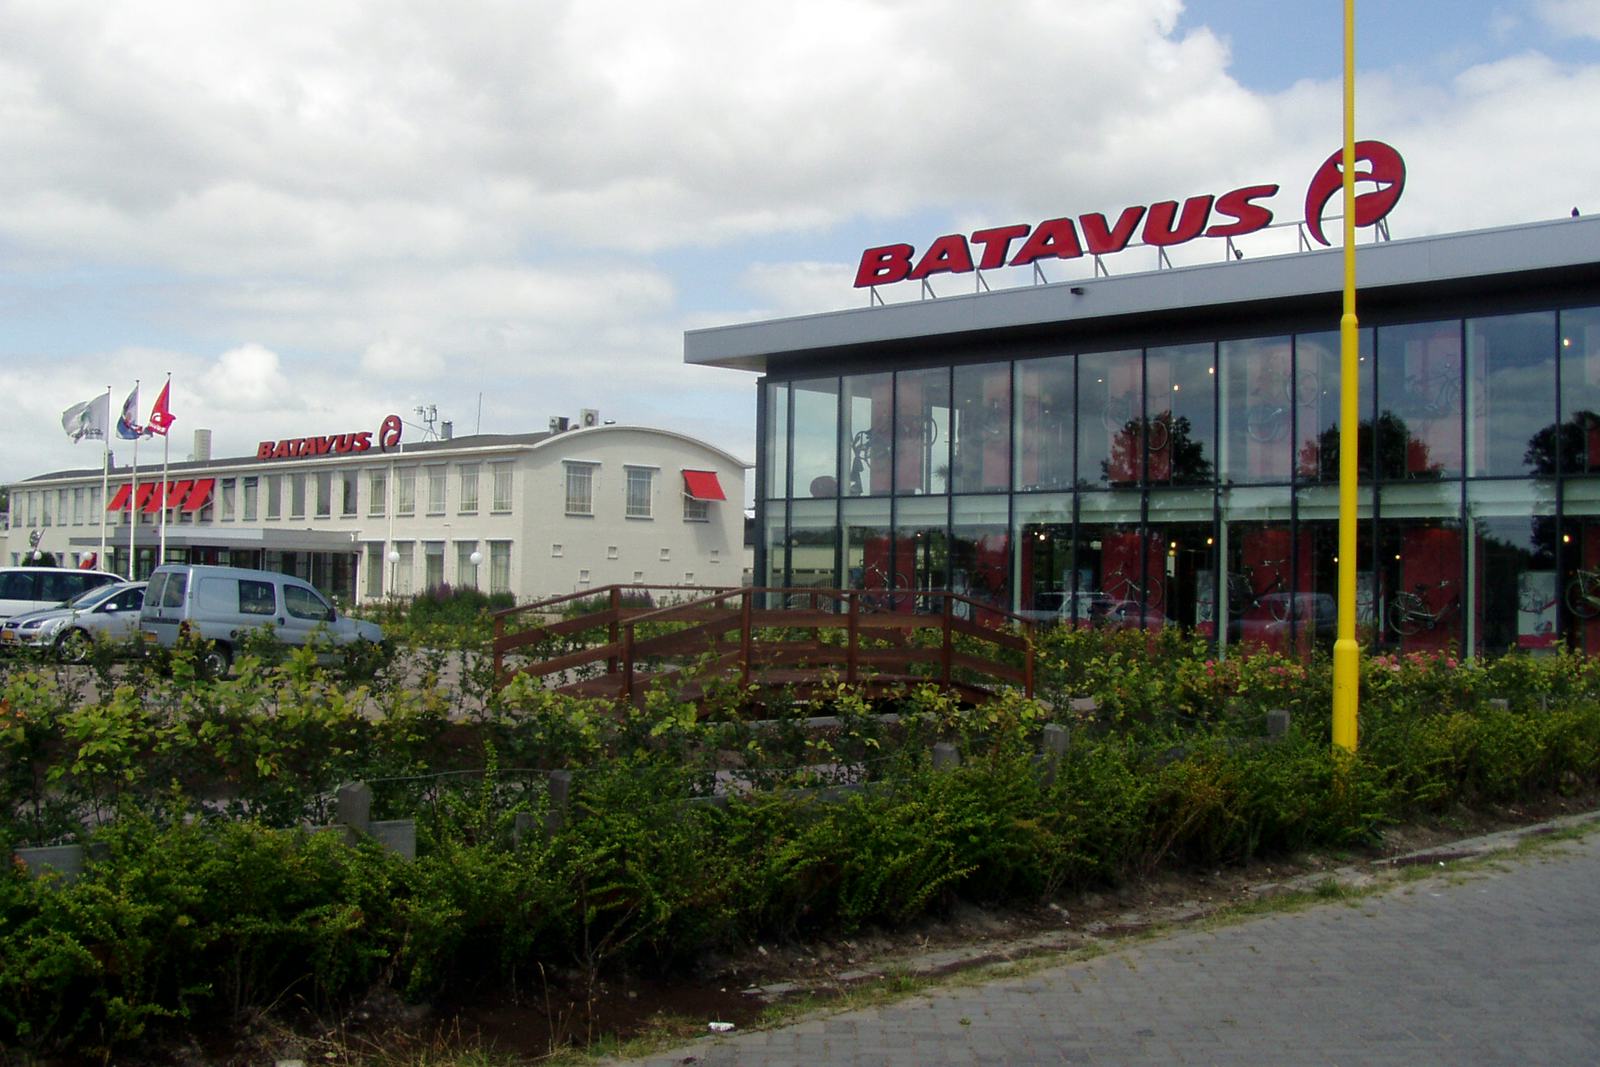 Production of Sparta branded bicycles and e-bikes will move to the Batavus production facility in Heerenveen, the Netherlands pictured here.